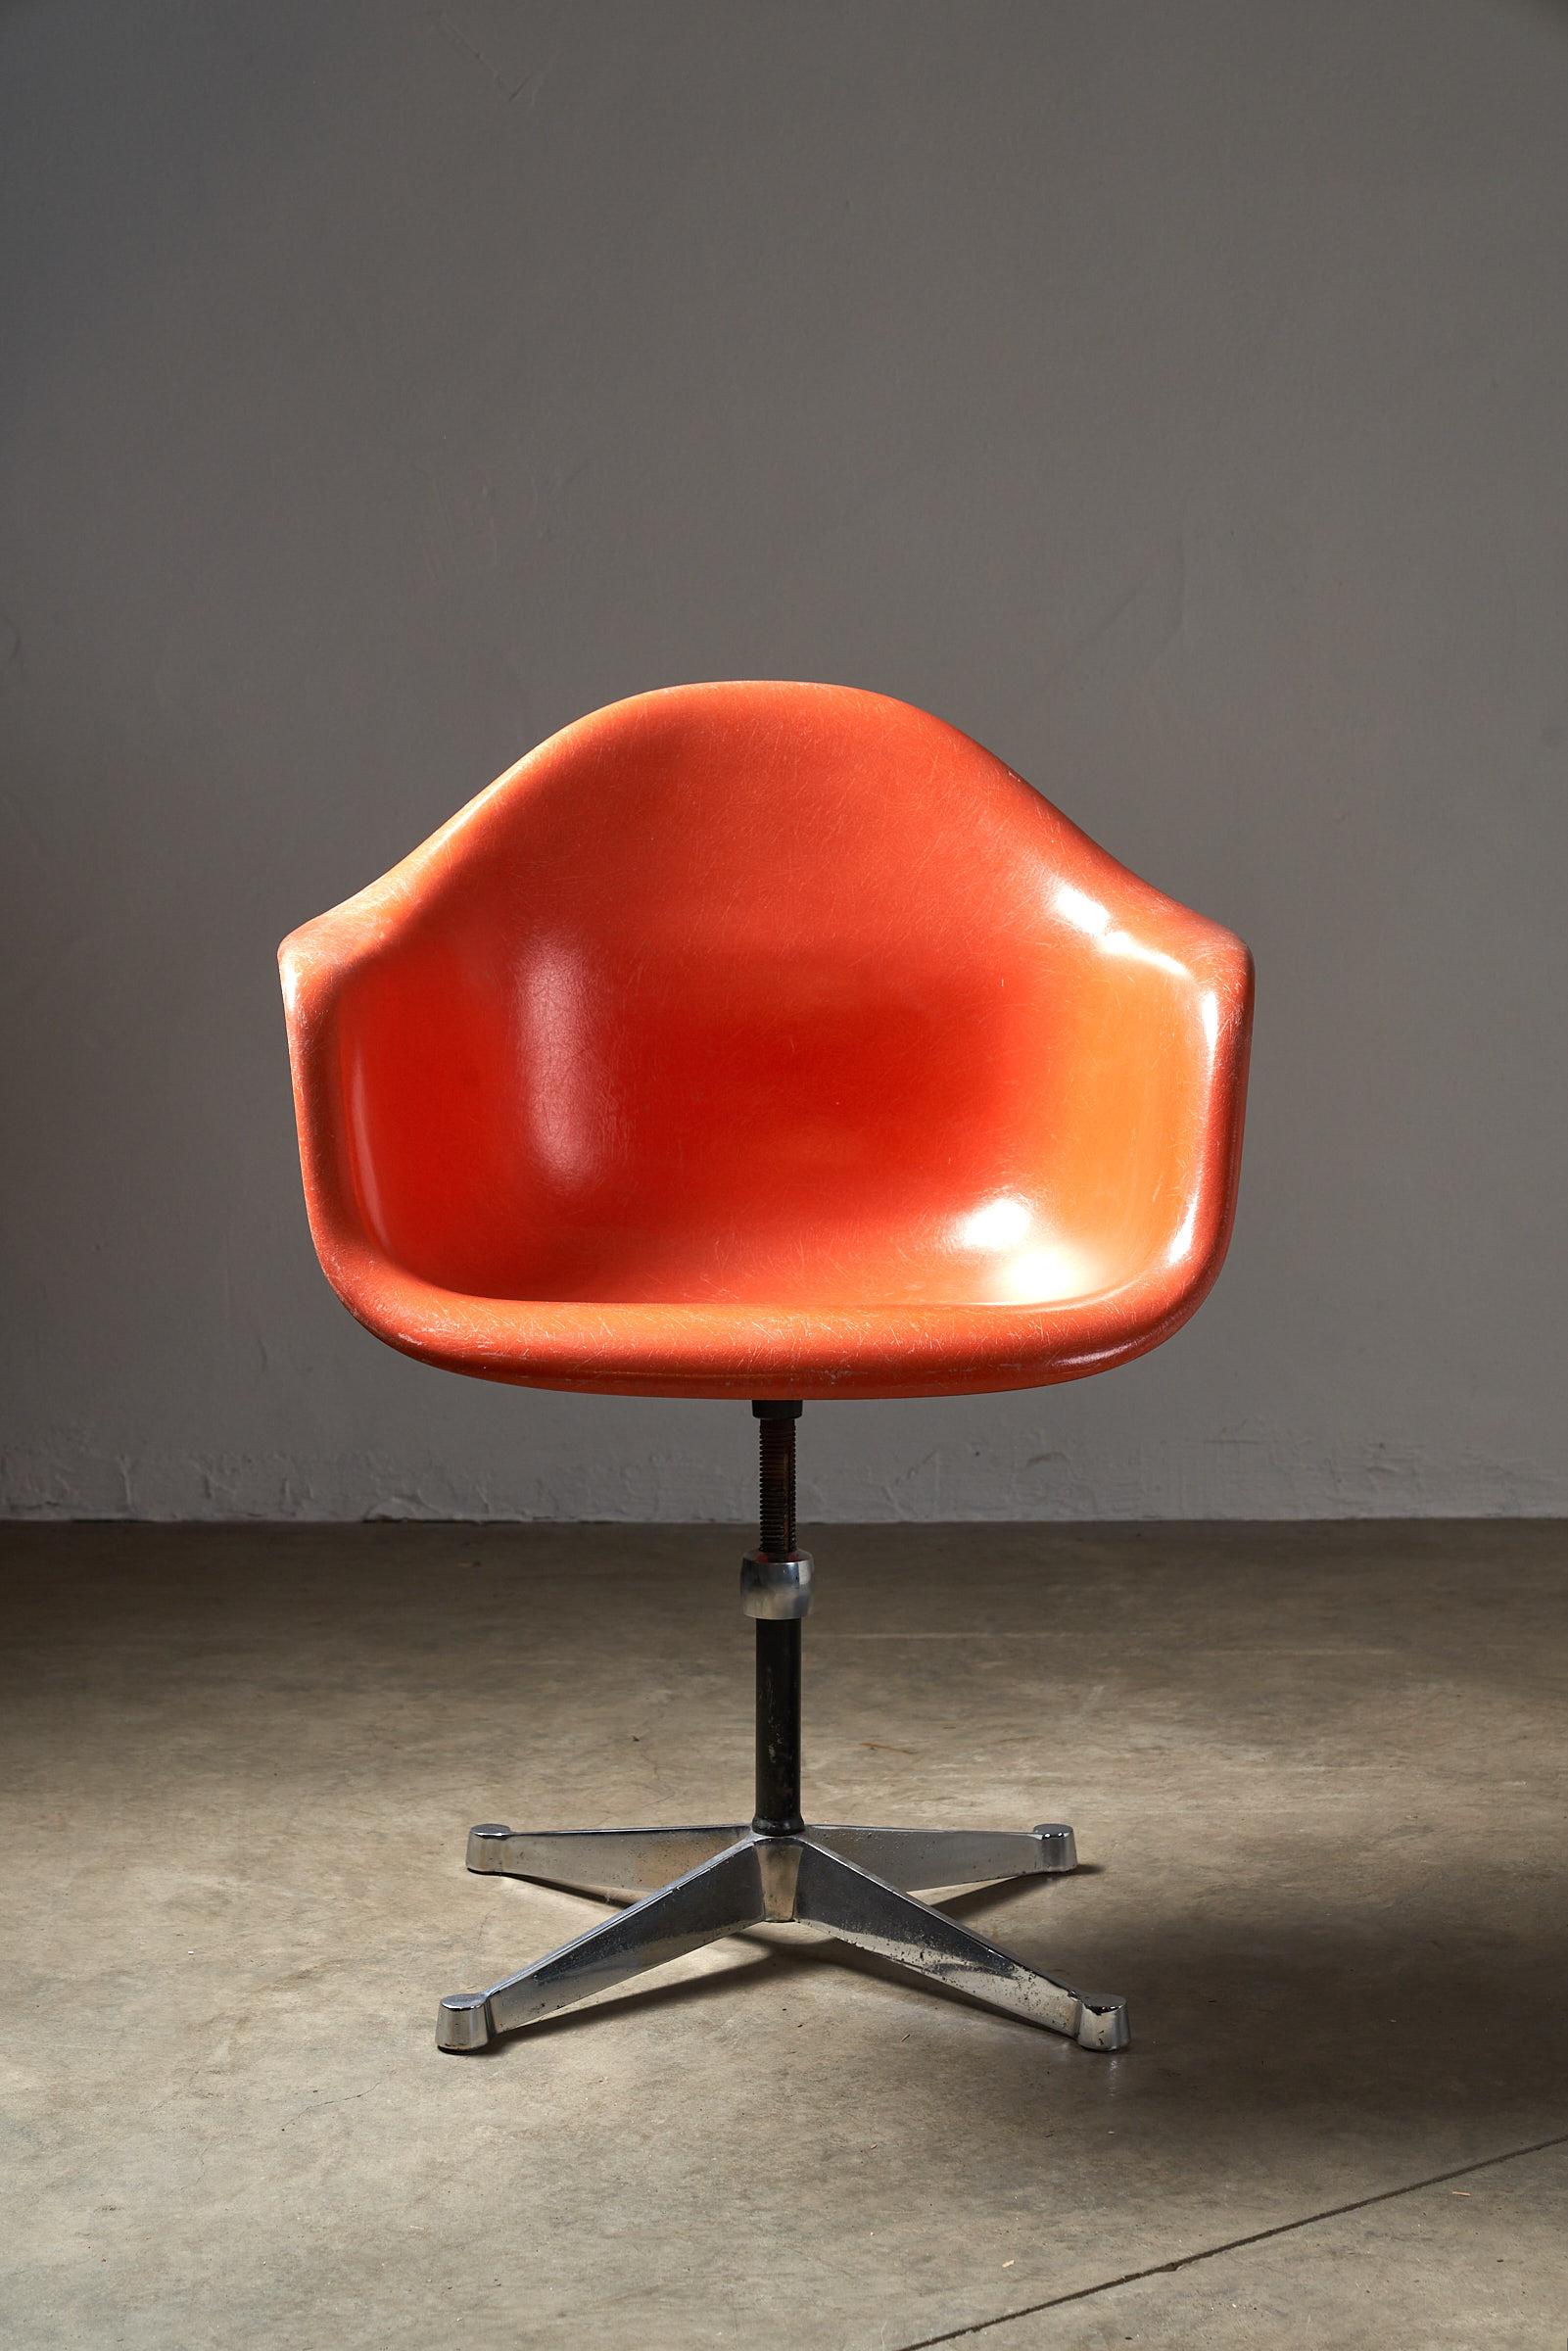 Introducing the Mid-Century Charles Eames by Herman Miller Orange Fibreglass Shell Chair, a timeless piece of design history. Each chair carries its own unique character, showcasing its age and heritage while maintaining its enduring appeal. The